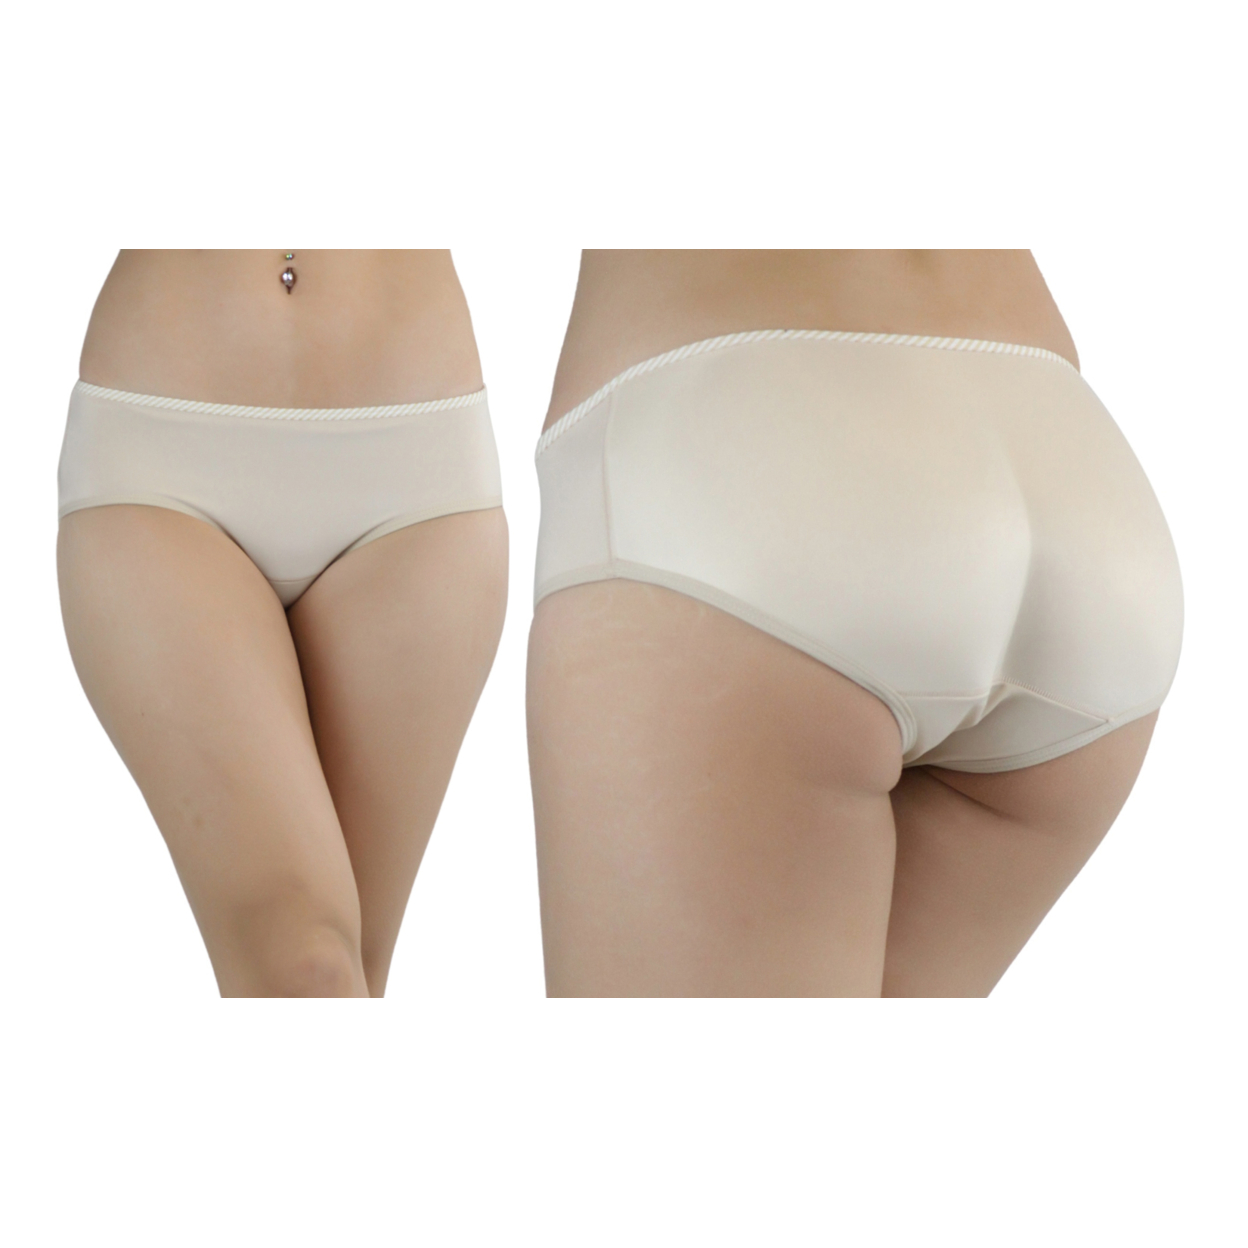 Women's Instant Booty Boosters Padded Panty - Beige, XS